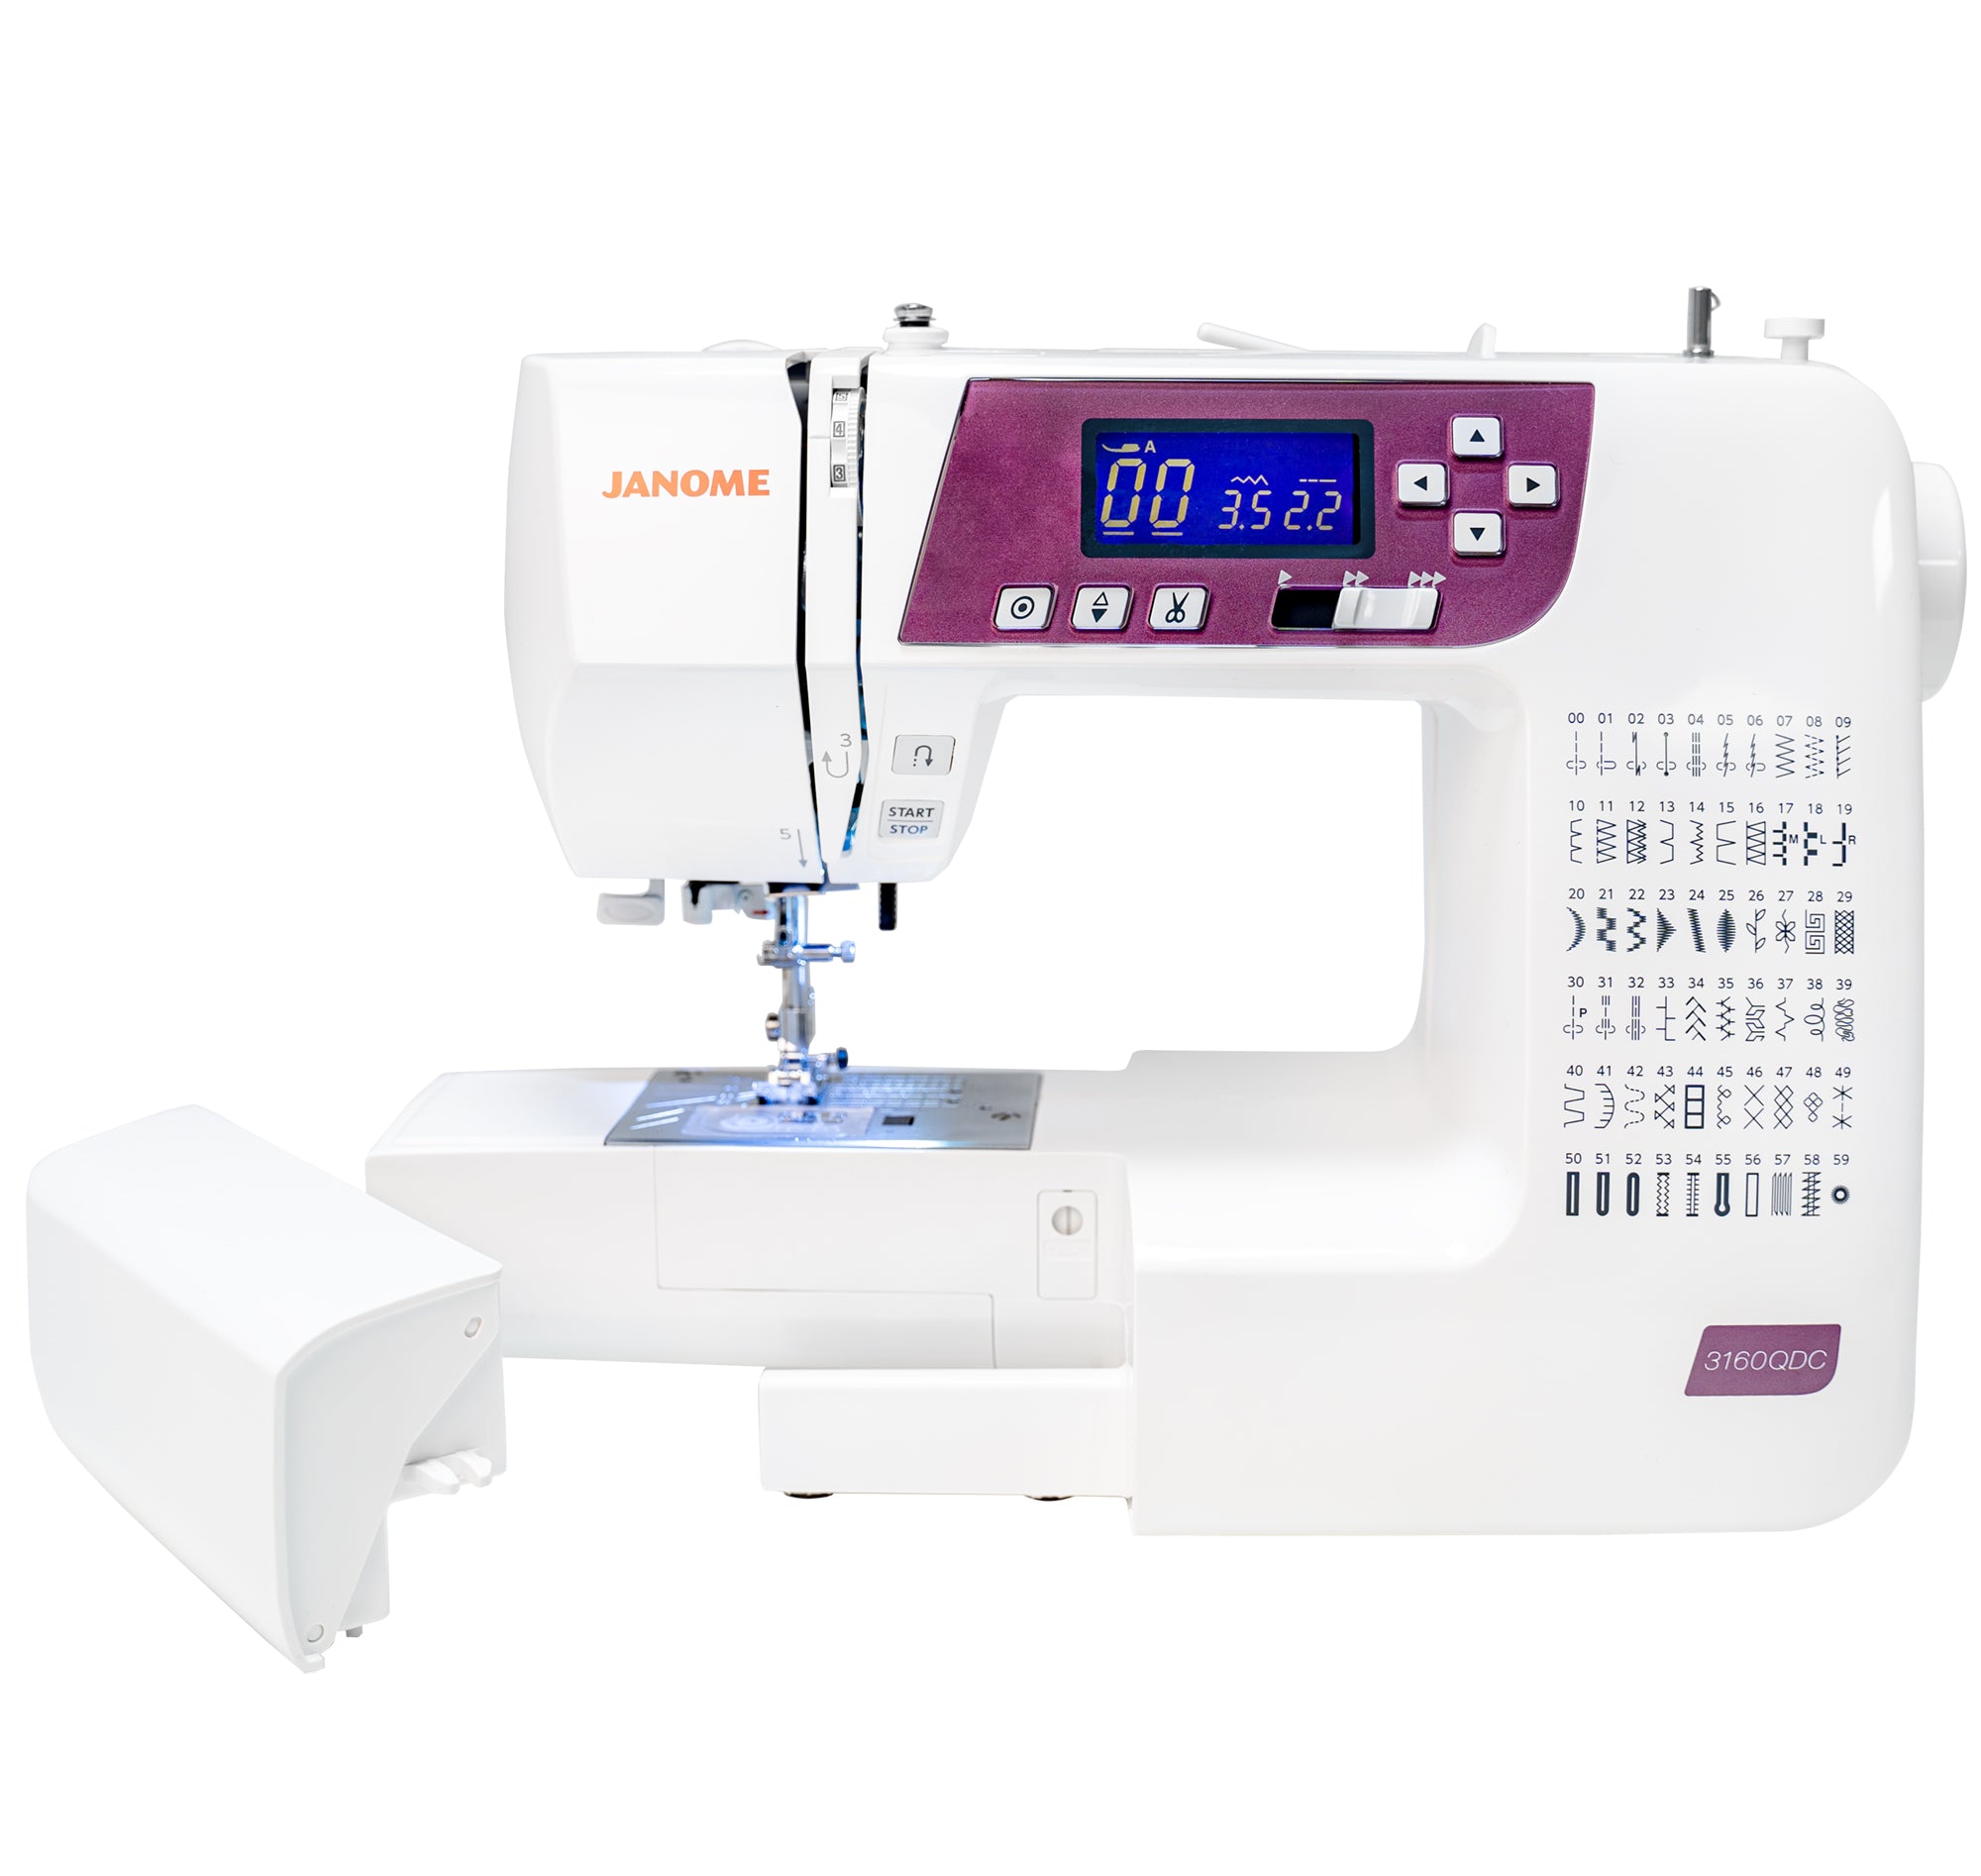 image of the Janome 3160QDC-G Sewing and Quilting Machine with an open compartment 